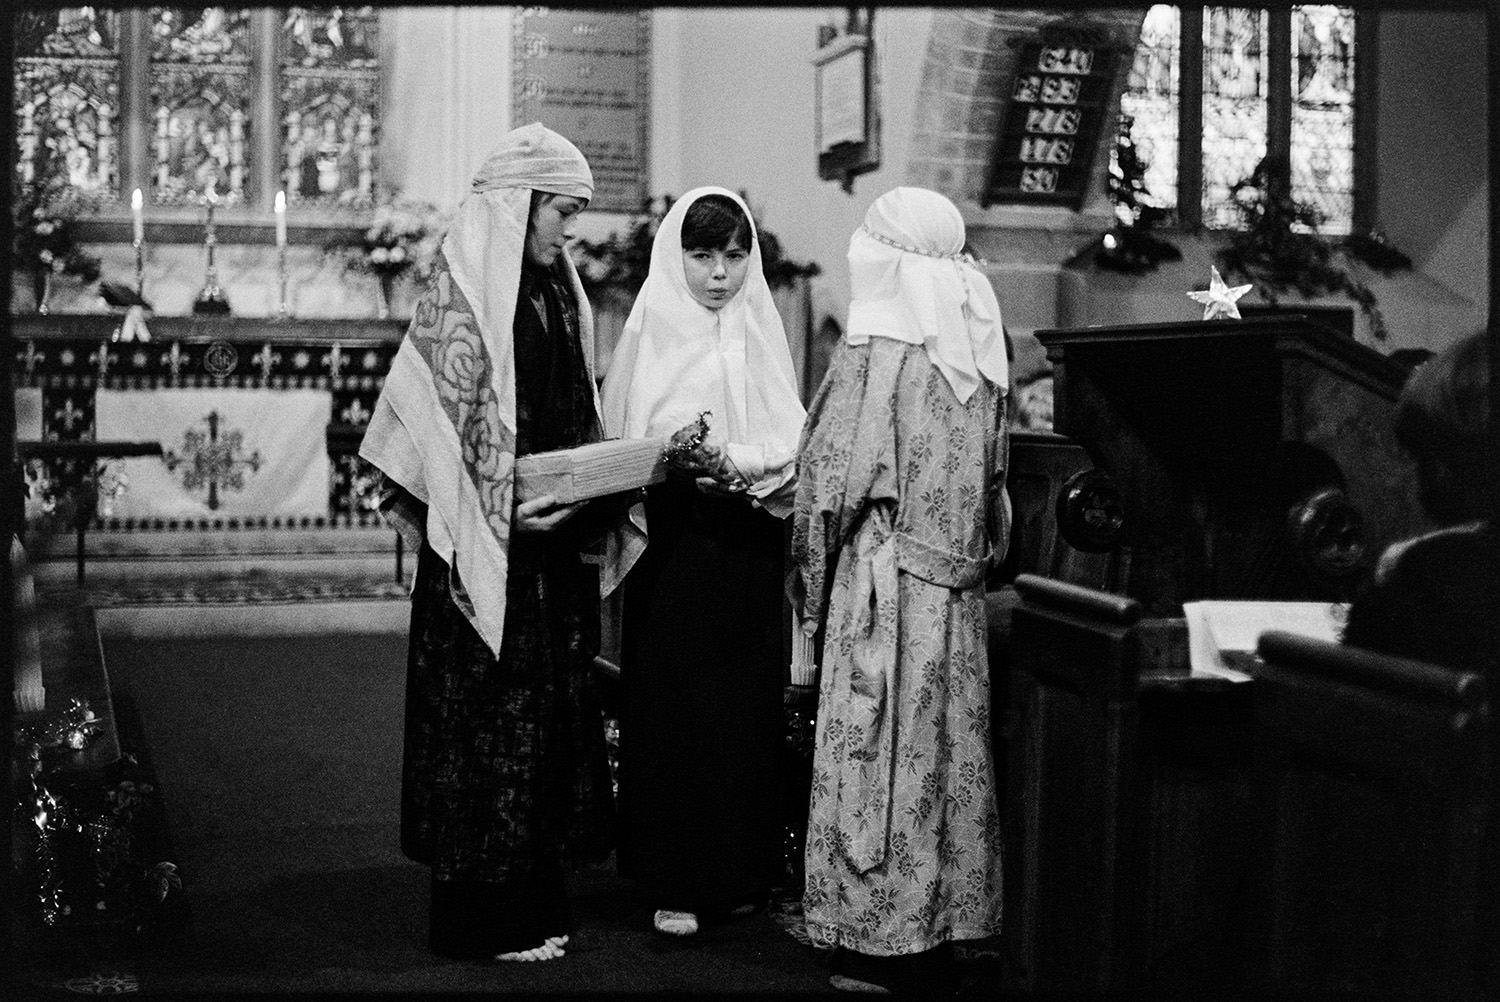 Nativity play, children in church. 
[Three children performing in a nativity play in Dolton Church. The altar can be seen in the background and the church is decorated for Christmas.]